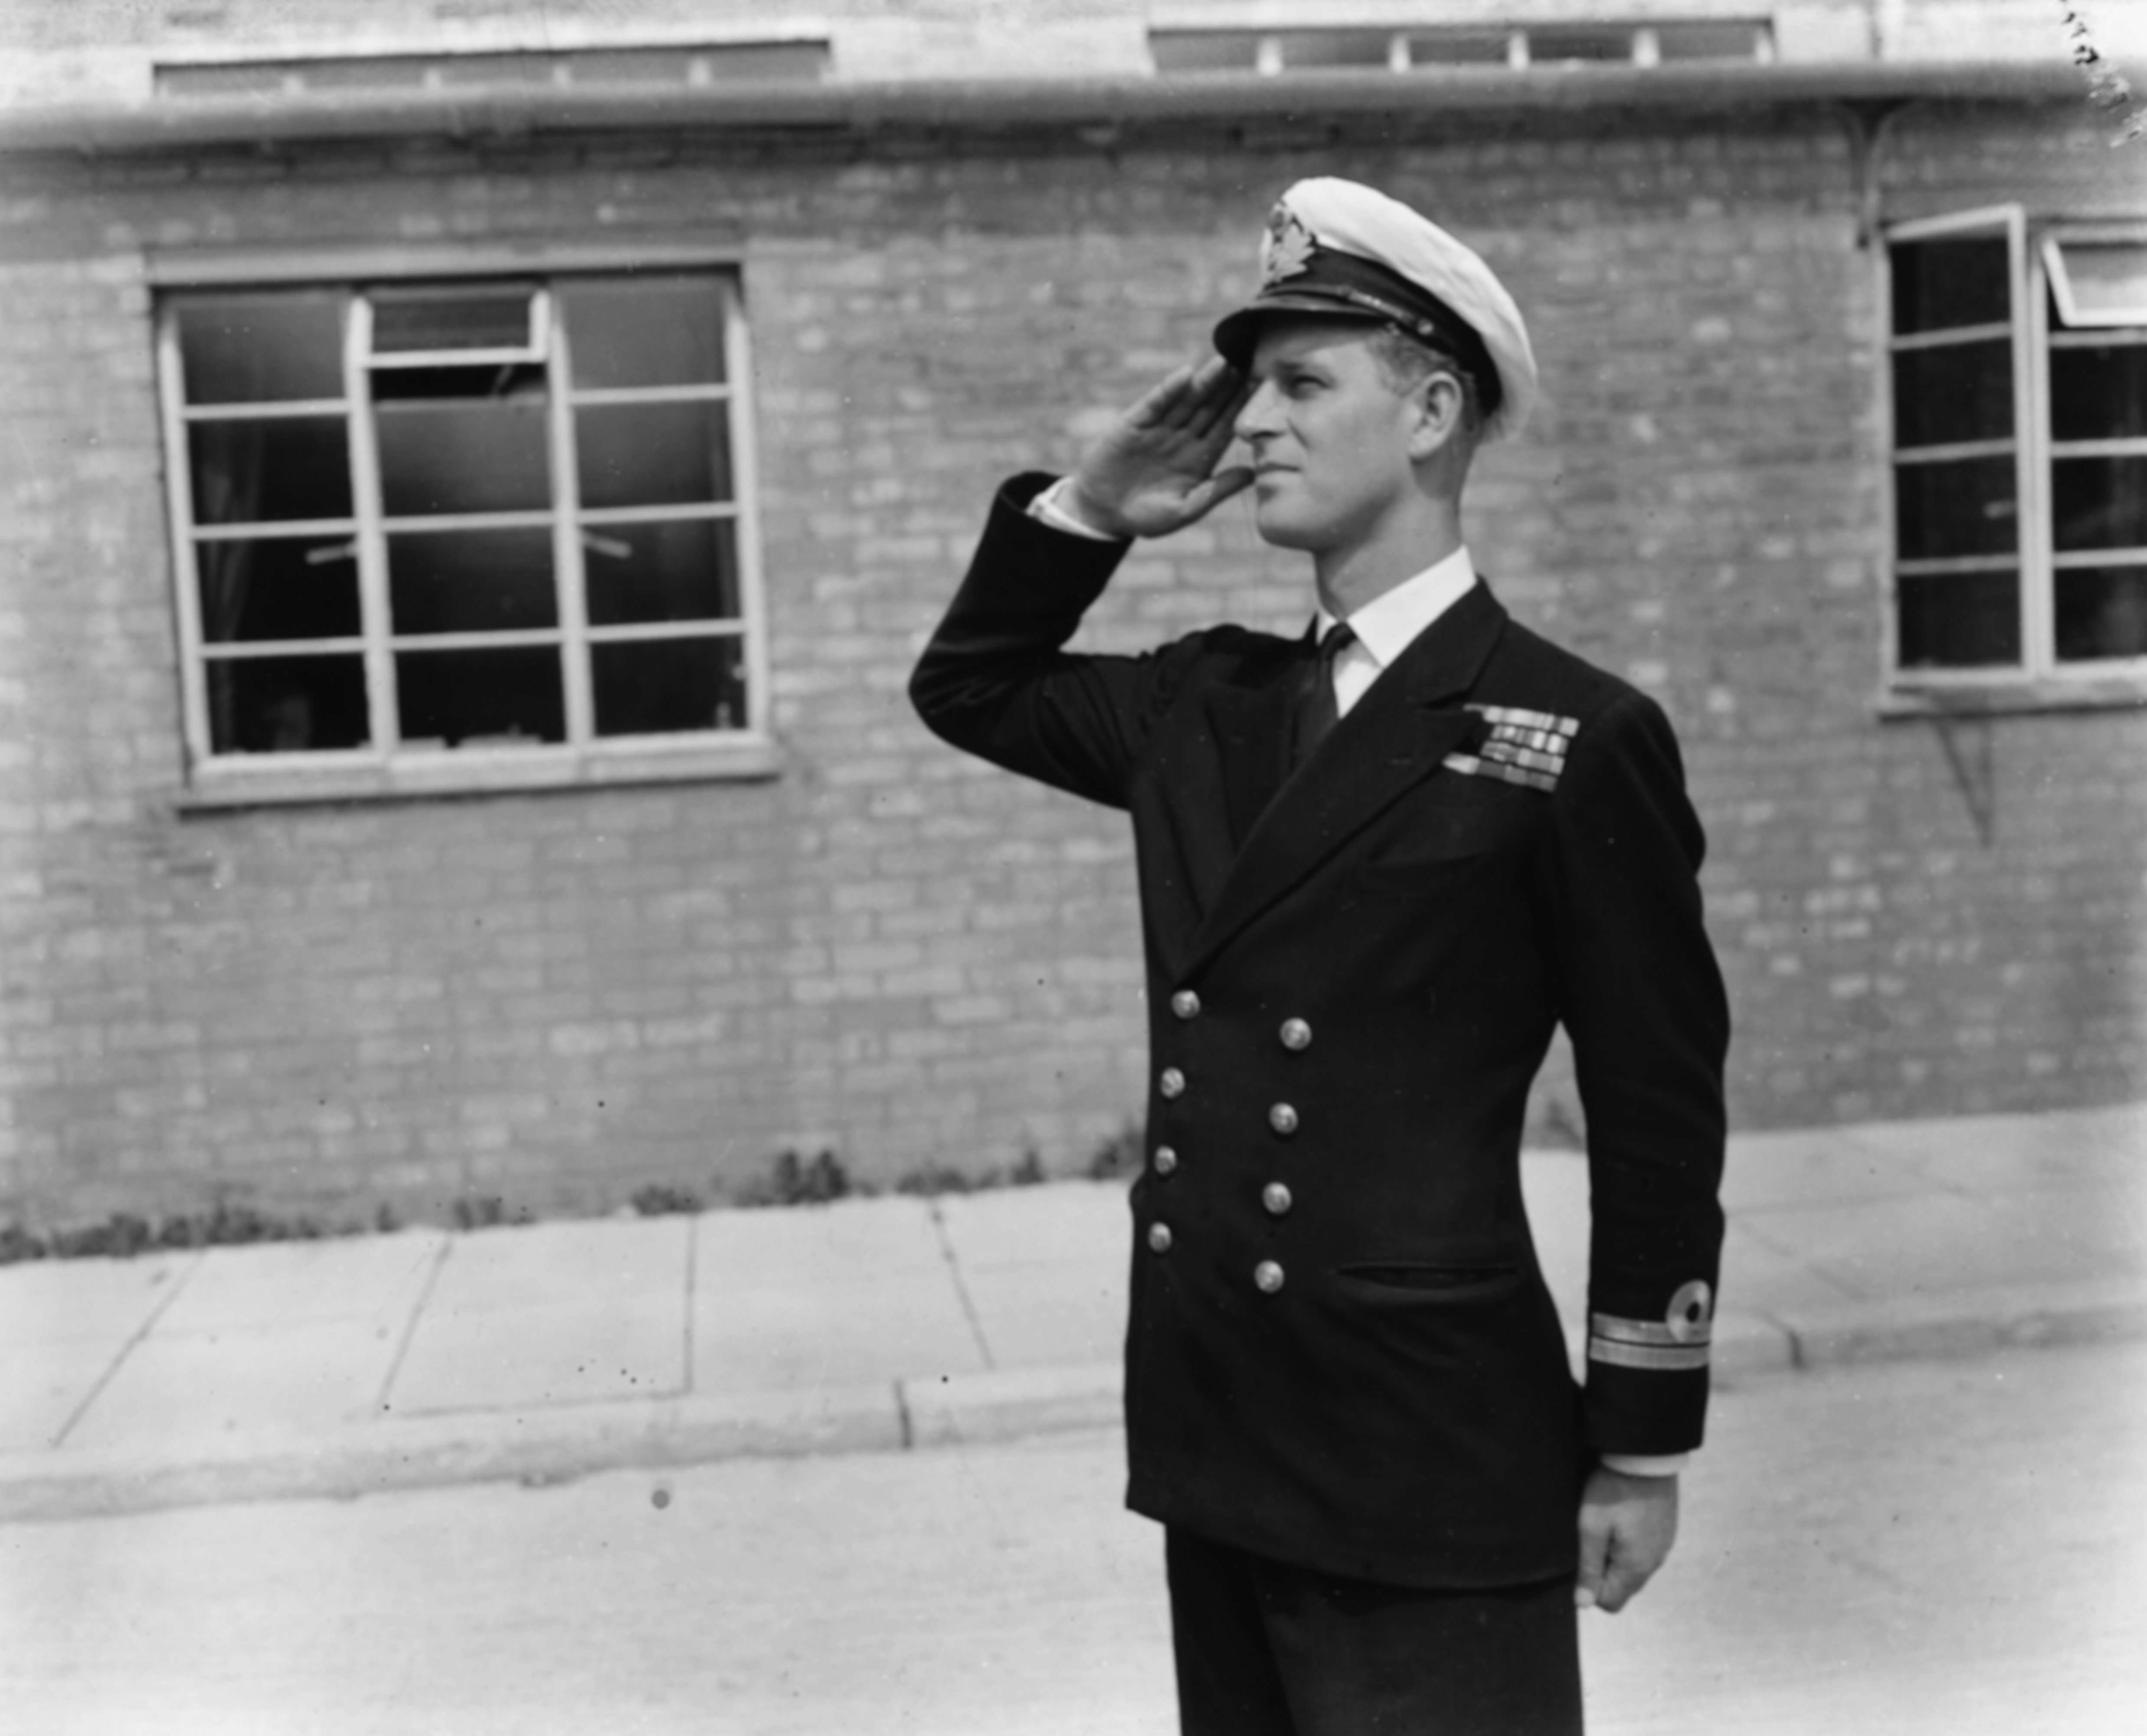 Lieutenant Philip Mountbatten, prior to his marriage to Princess Elizabeth, saluting as he resumes his attendance at the Royal Naval Officers School at Kingsmoor, England, July 31, 1947. | Source: Getty Images